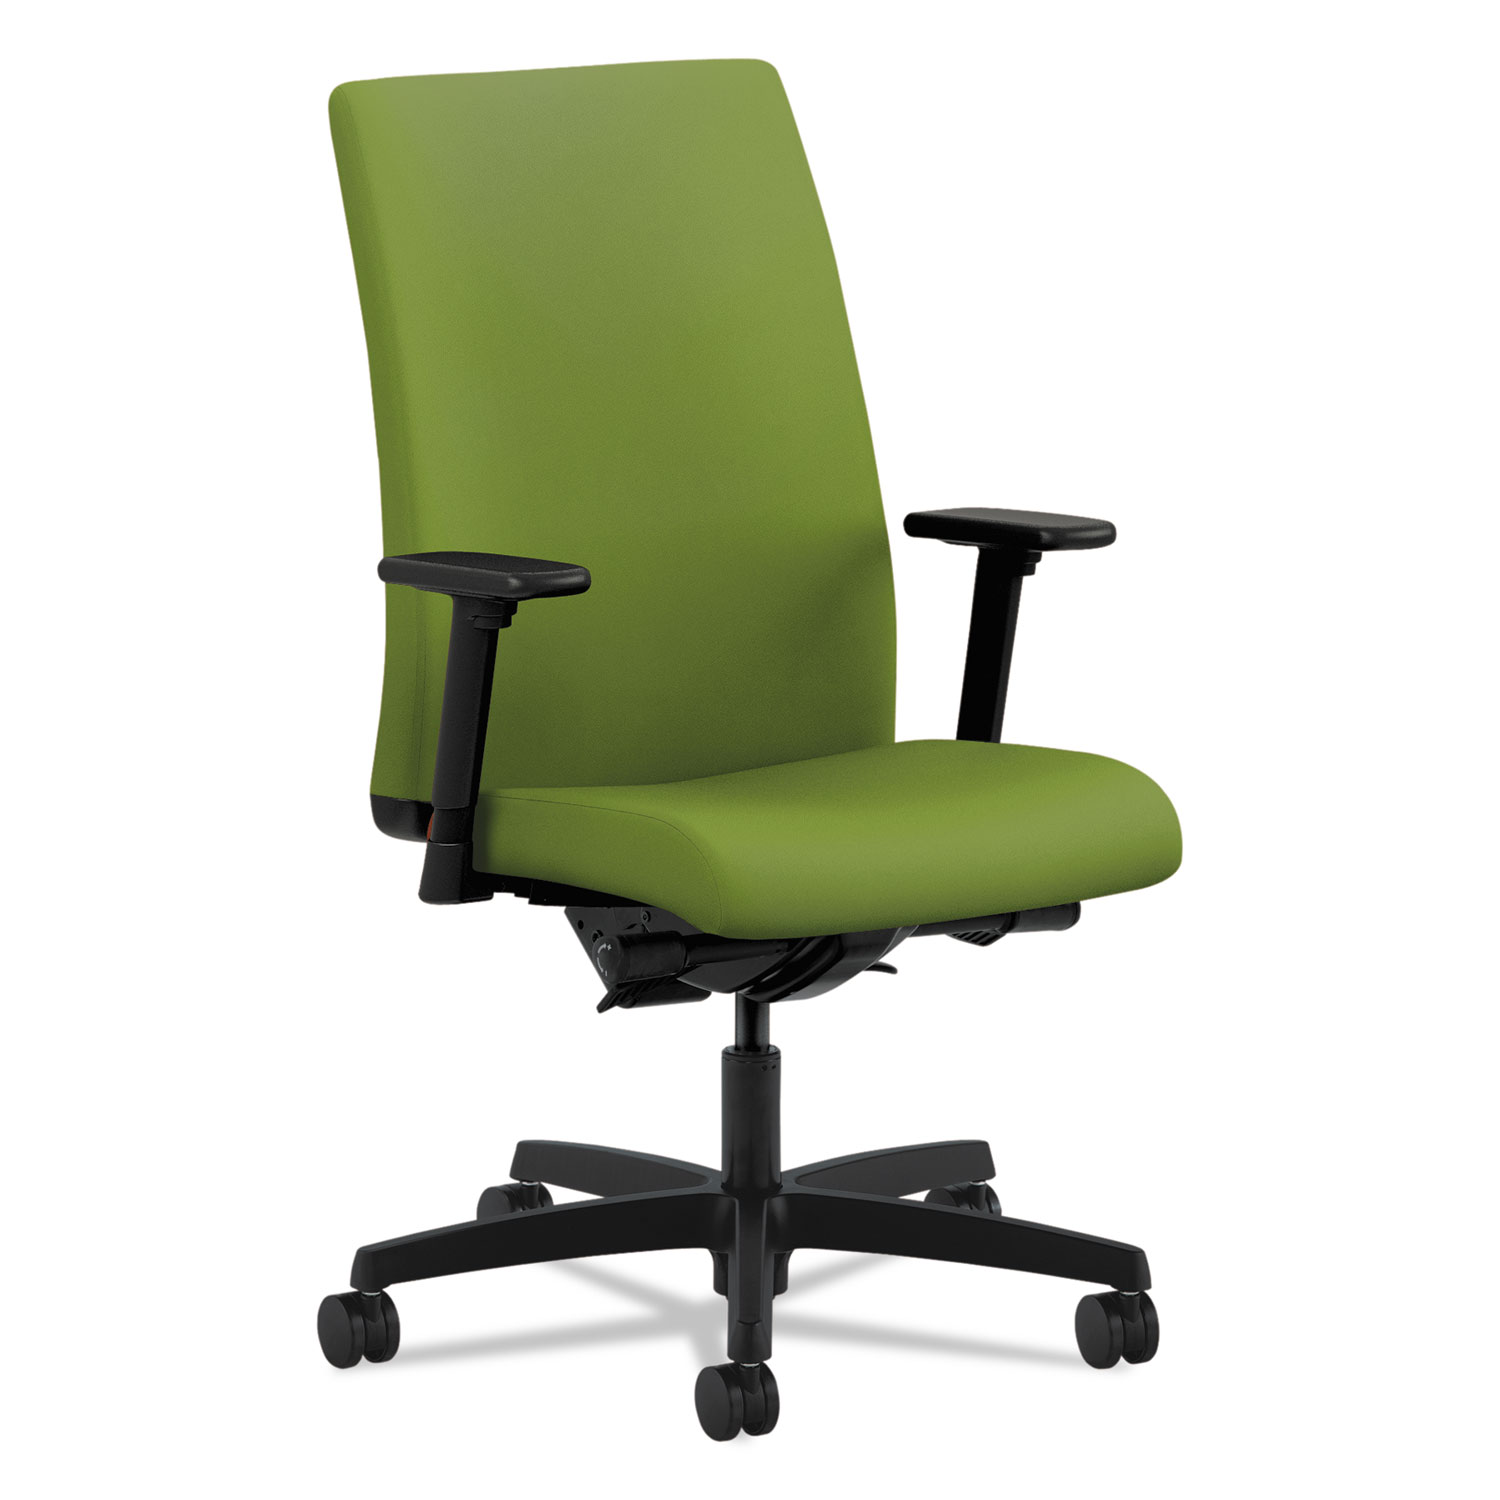  HON HIWM3.A.H.U.CU84.T.SB Ignition Series Mid-Back Work Chair, Supports up to 300 lbs., Pear Seat/Pear Back, Black Base (HONIW104CU84) 